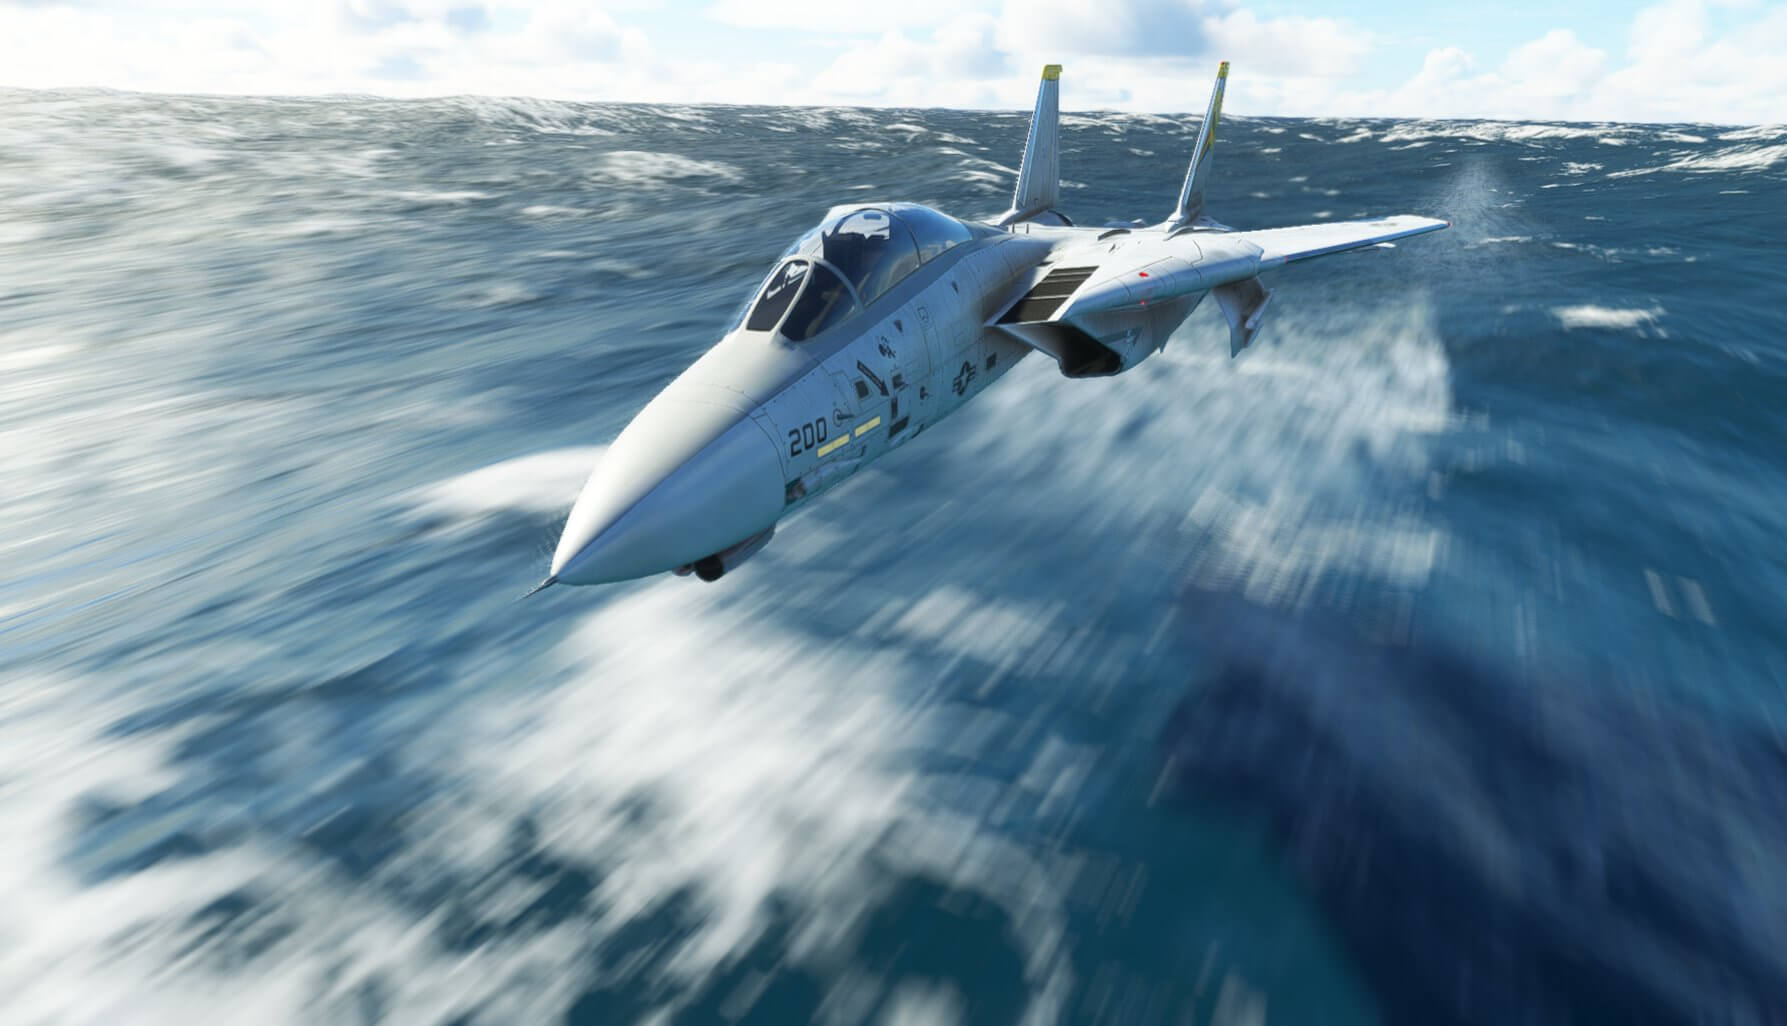 An F-14 Tomcat does a fast pass over rough ocean water.